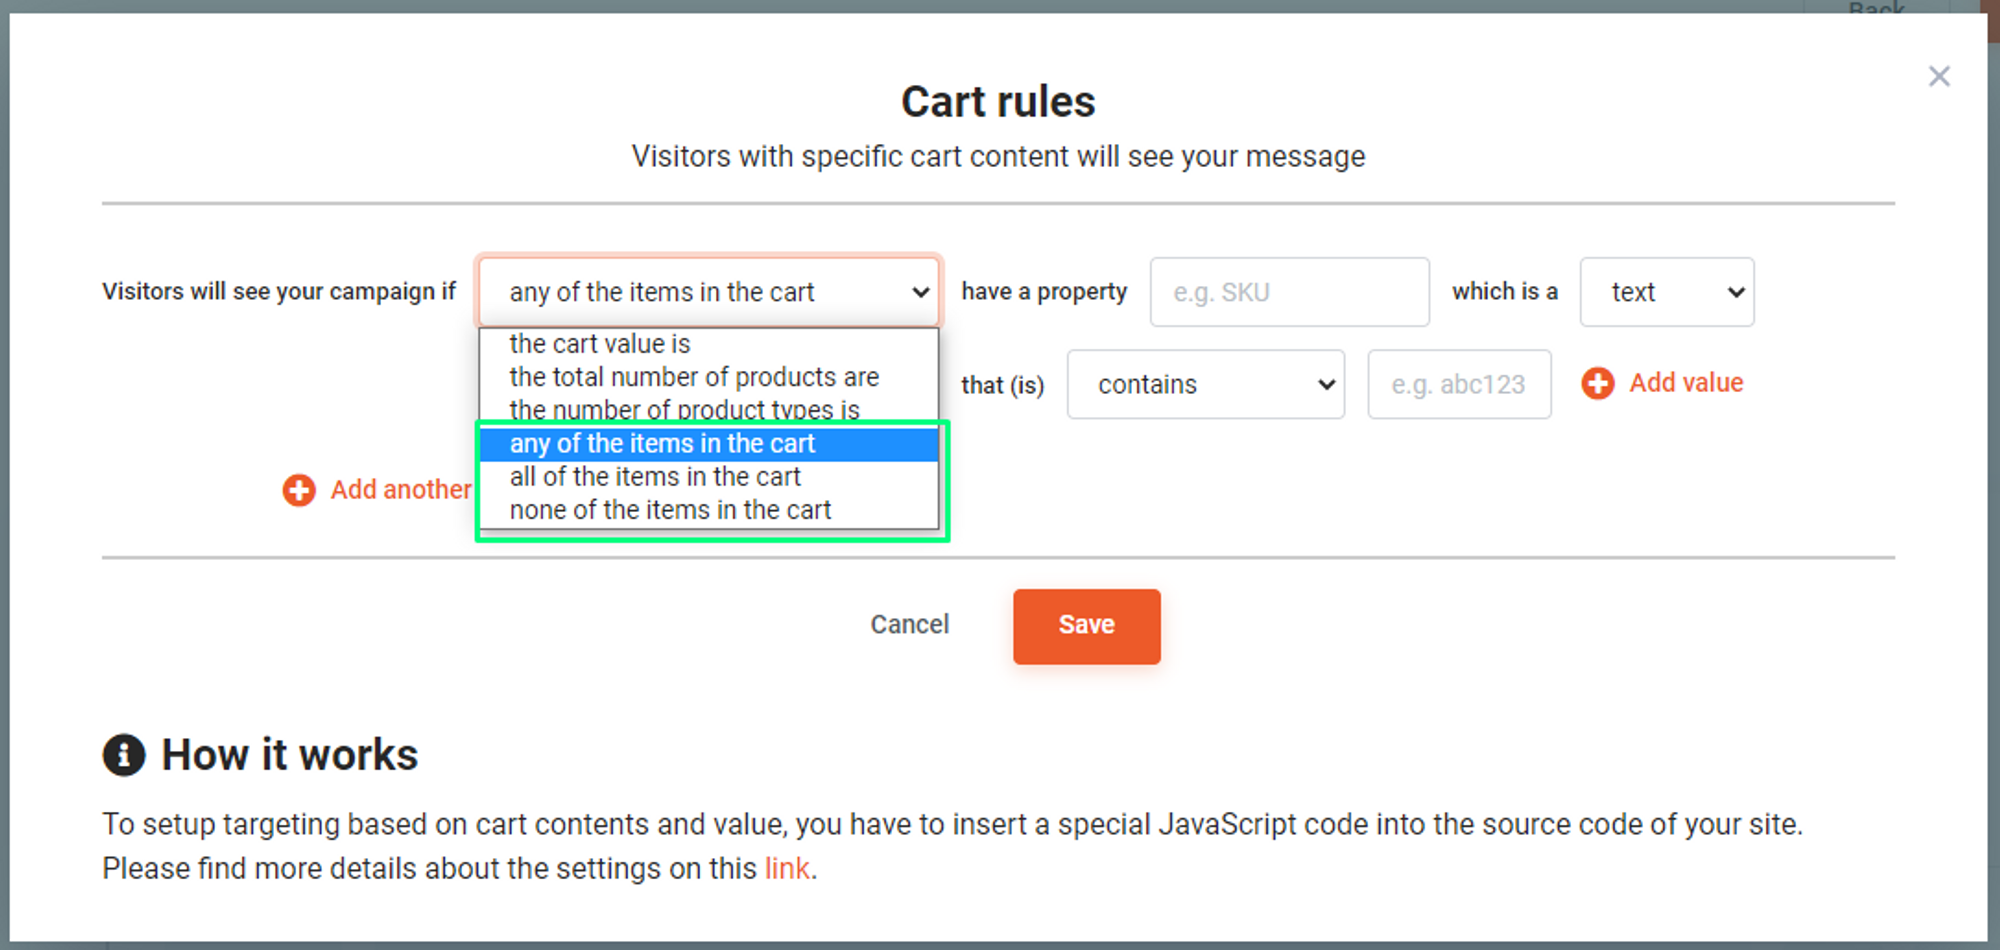 Cart_rules15.png